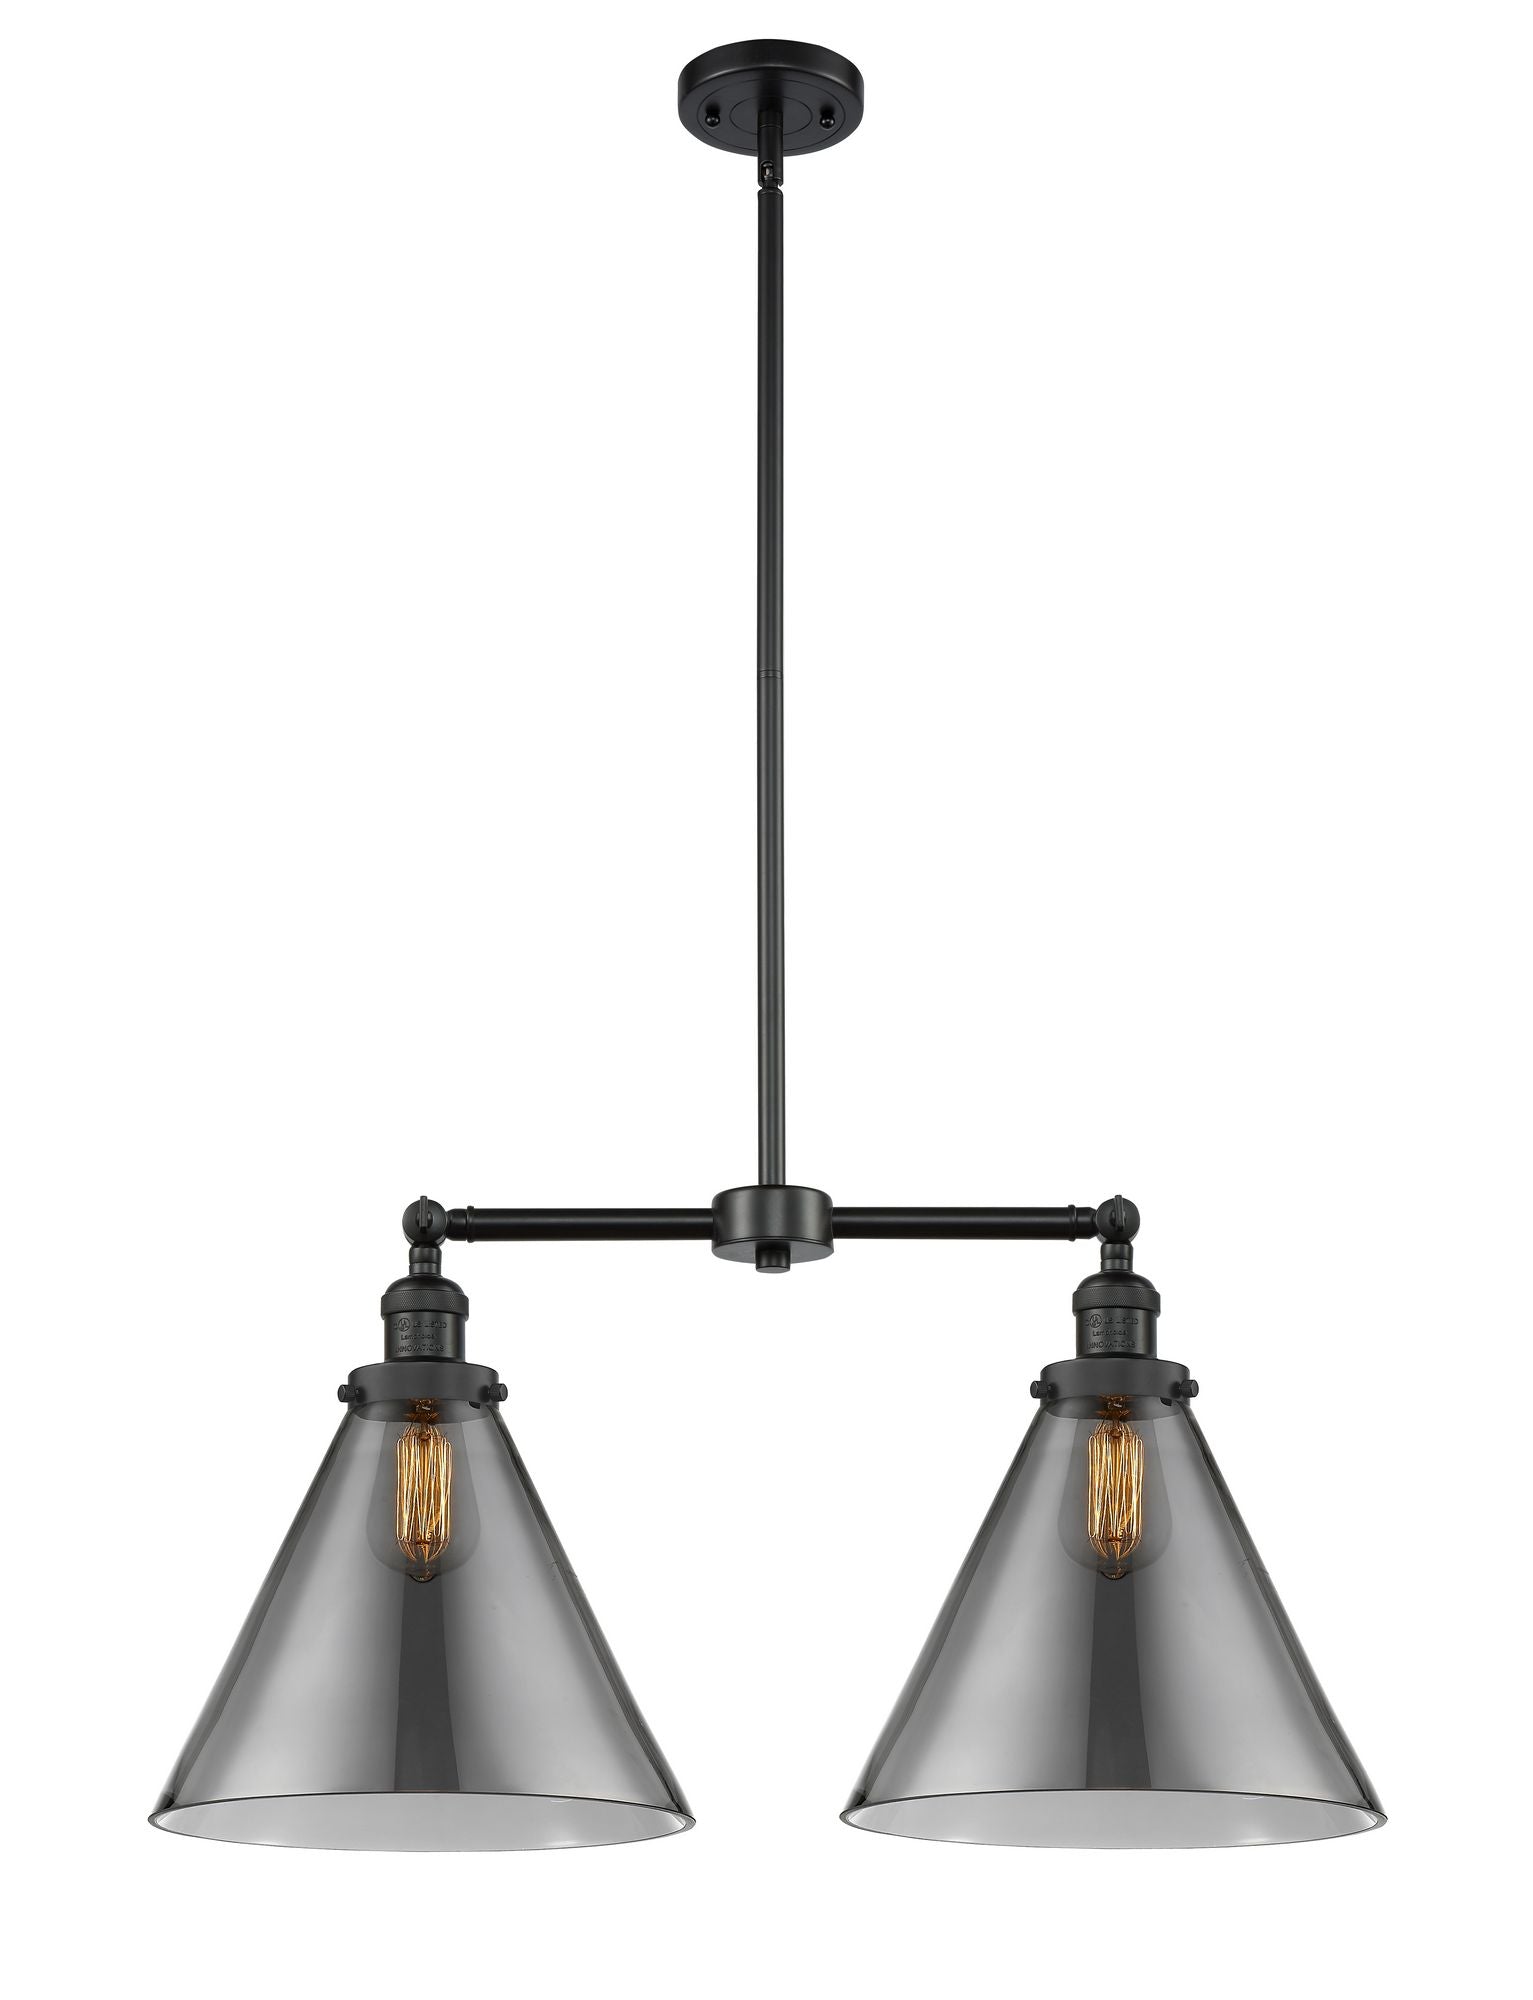 209-BK-G43-L 2-Light 21" Matte Black Island Light - Plated Smoke Cone 12" Glass - LED Bulb - Dimmensions: 21 x 5 x 10<br>Minimum Height : 25.125<br>Maximum Height : 49.125 - Sloped Ceiling Compatible: Yes